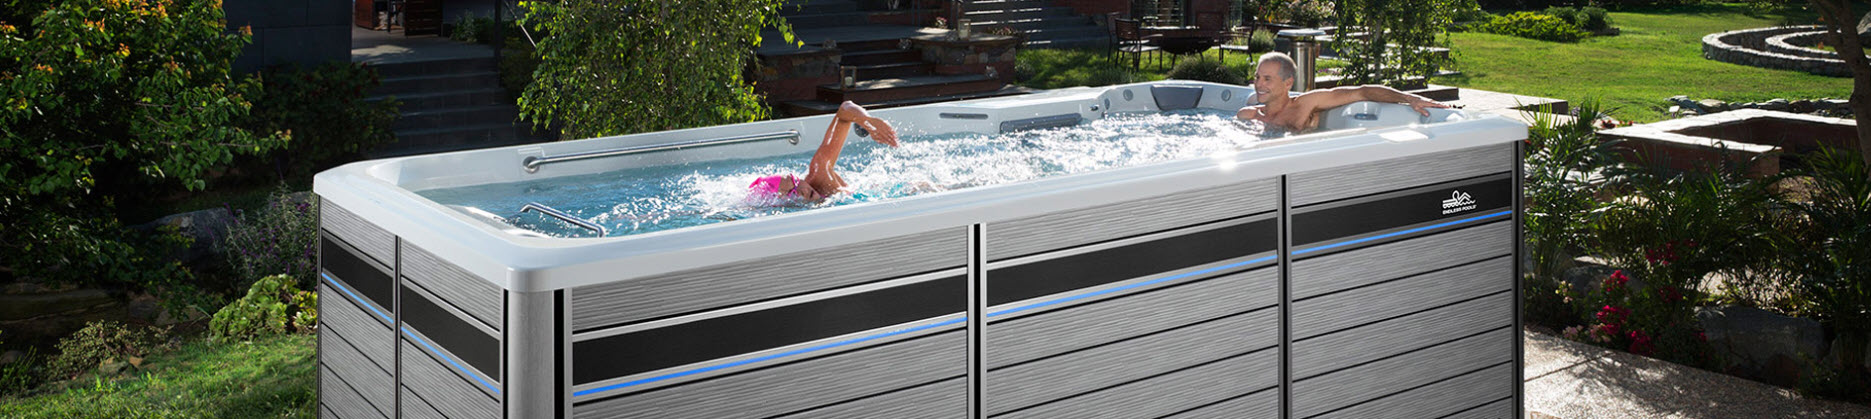 Looking for a Smart Investment? Consider a Swim Spa!, Lap Pools Dealers Muskego